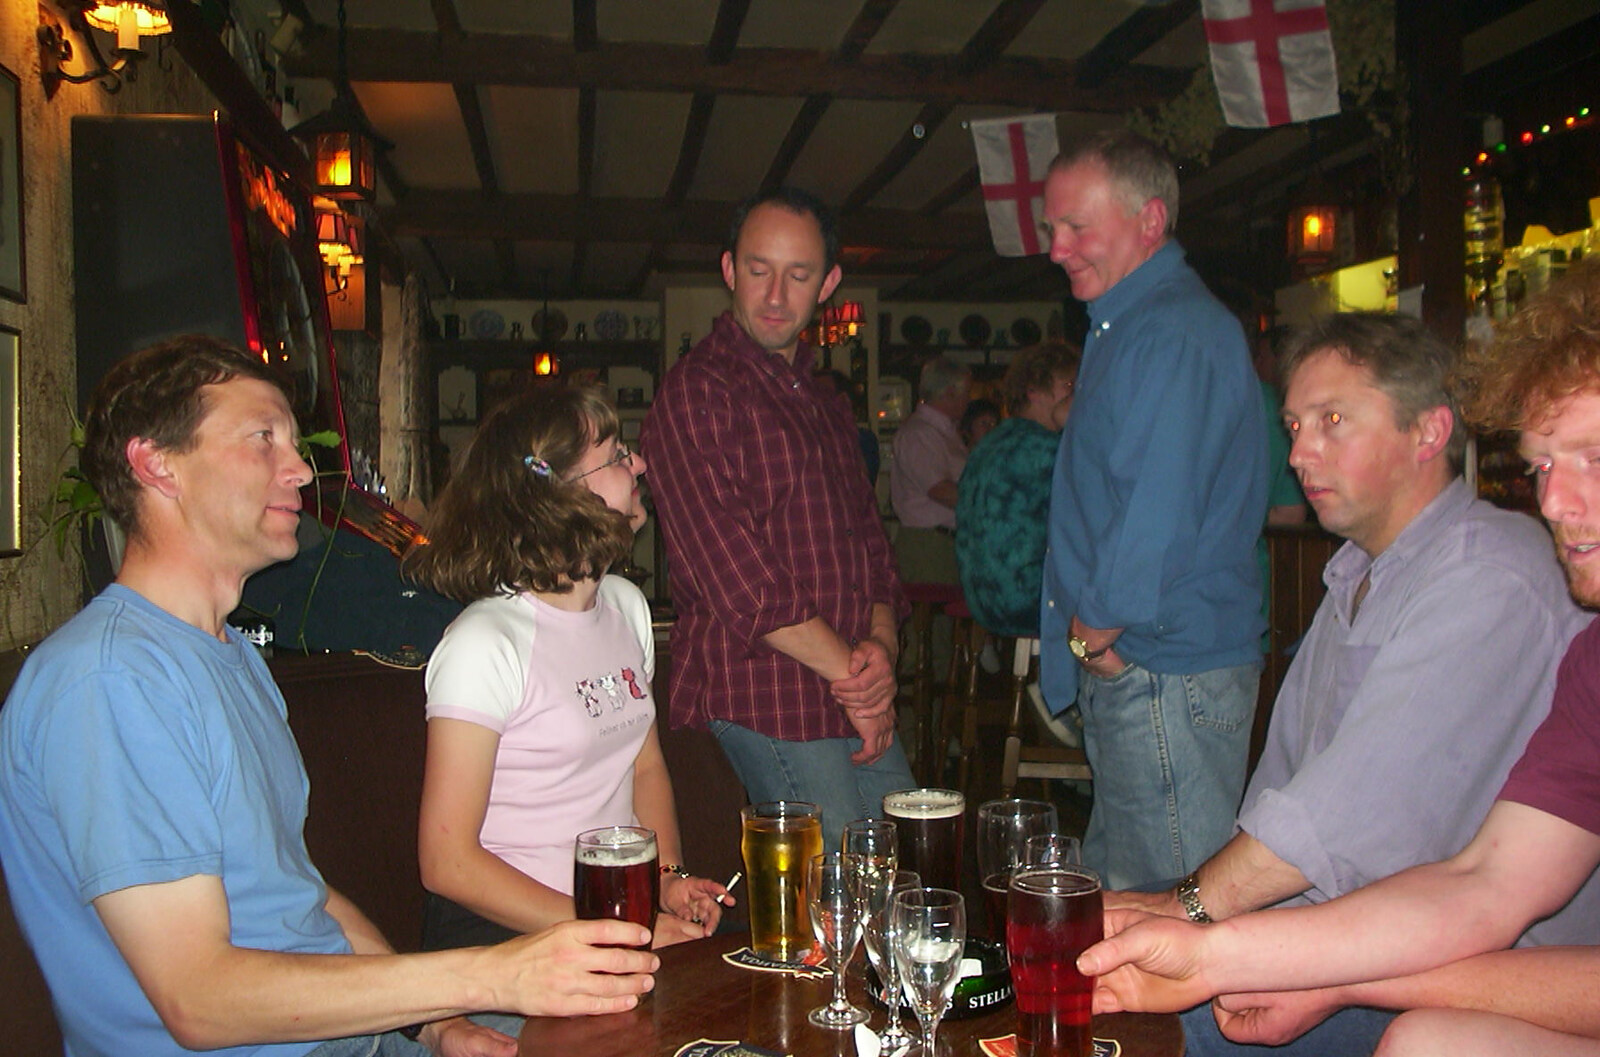 A Rainy Barbeque at the Swan Inn, Brome, Suffolk - 15th June 2002: The gang